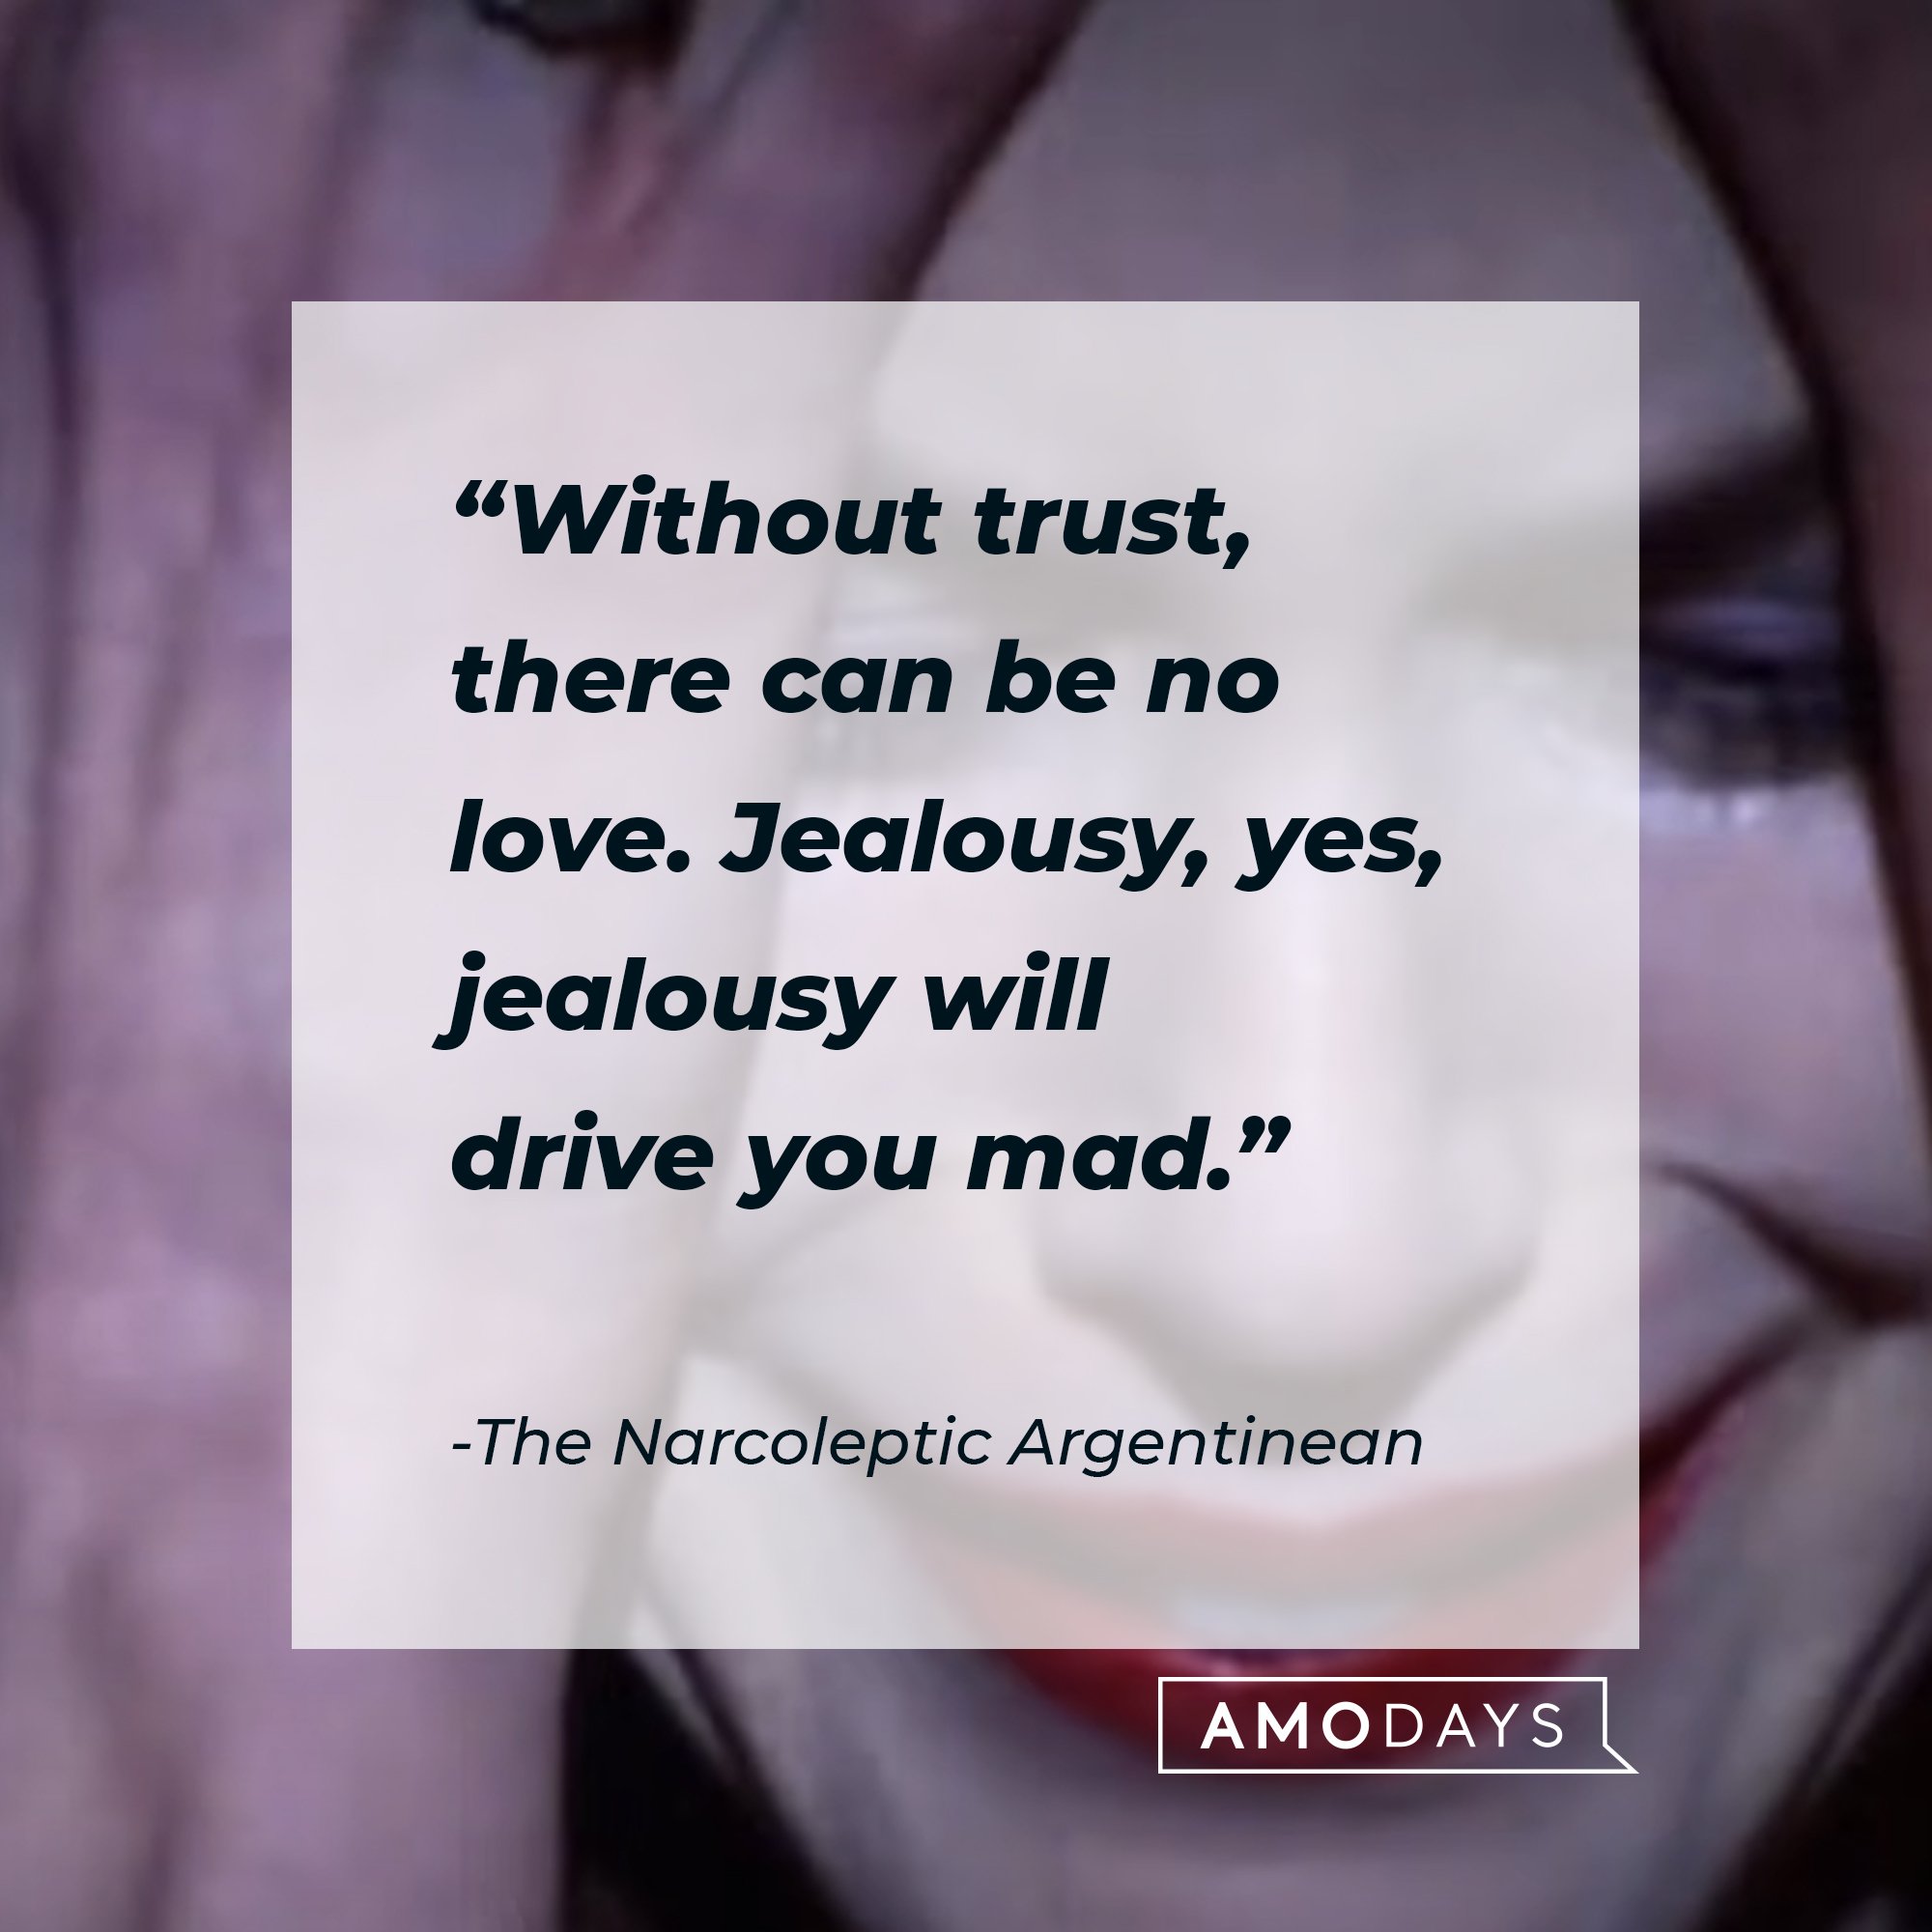 The Narcoleptic Argentinean's quote: "Without trust, there can be no love. Jealousy, yes, jealousy will drive you mad." | Image: AmoDays